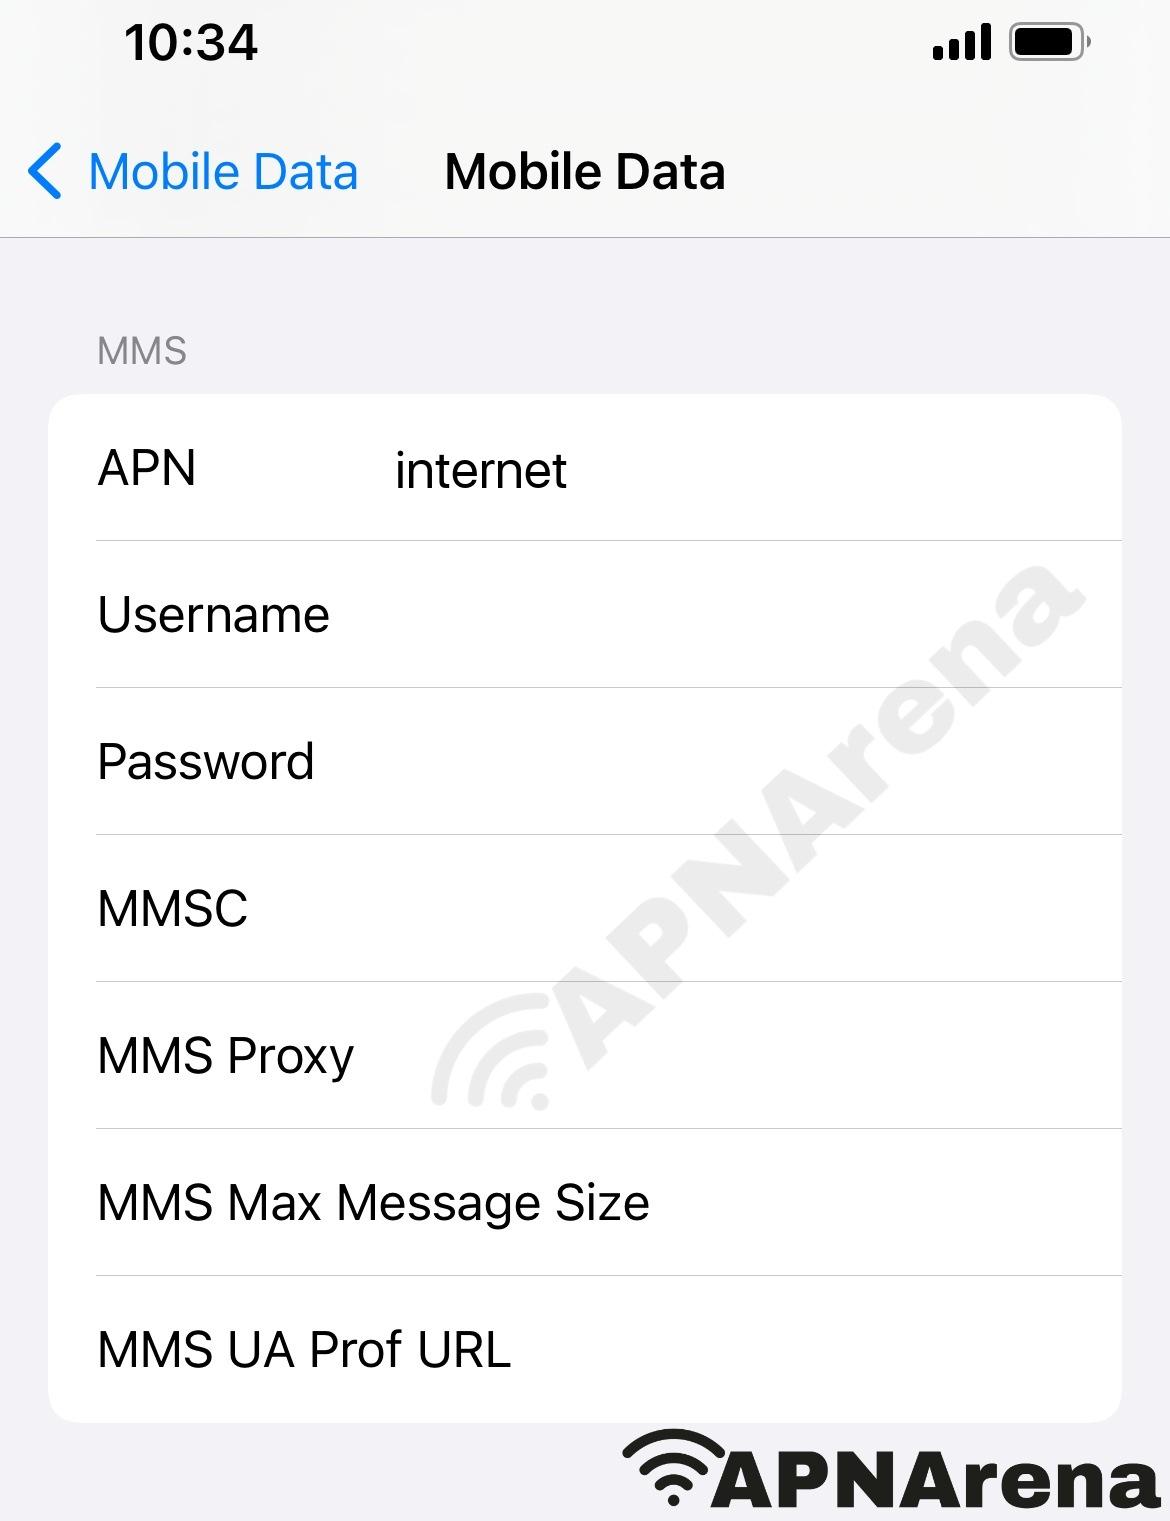 BSNL MMS Settings for iPhone